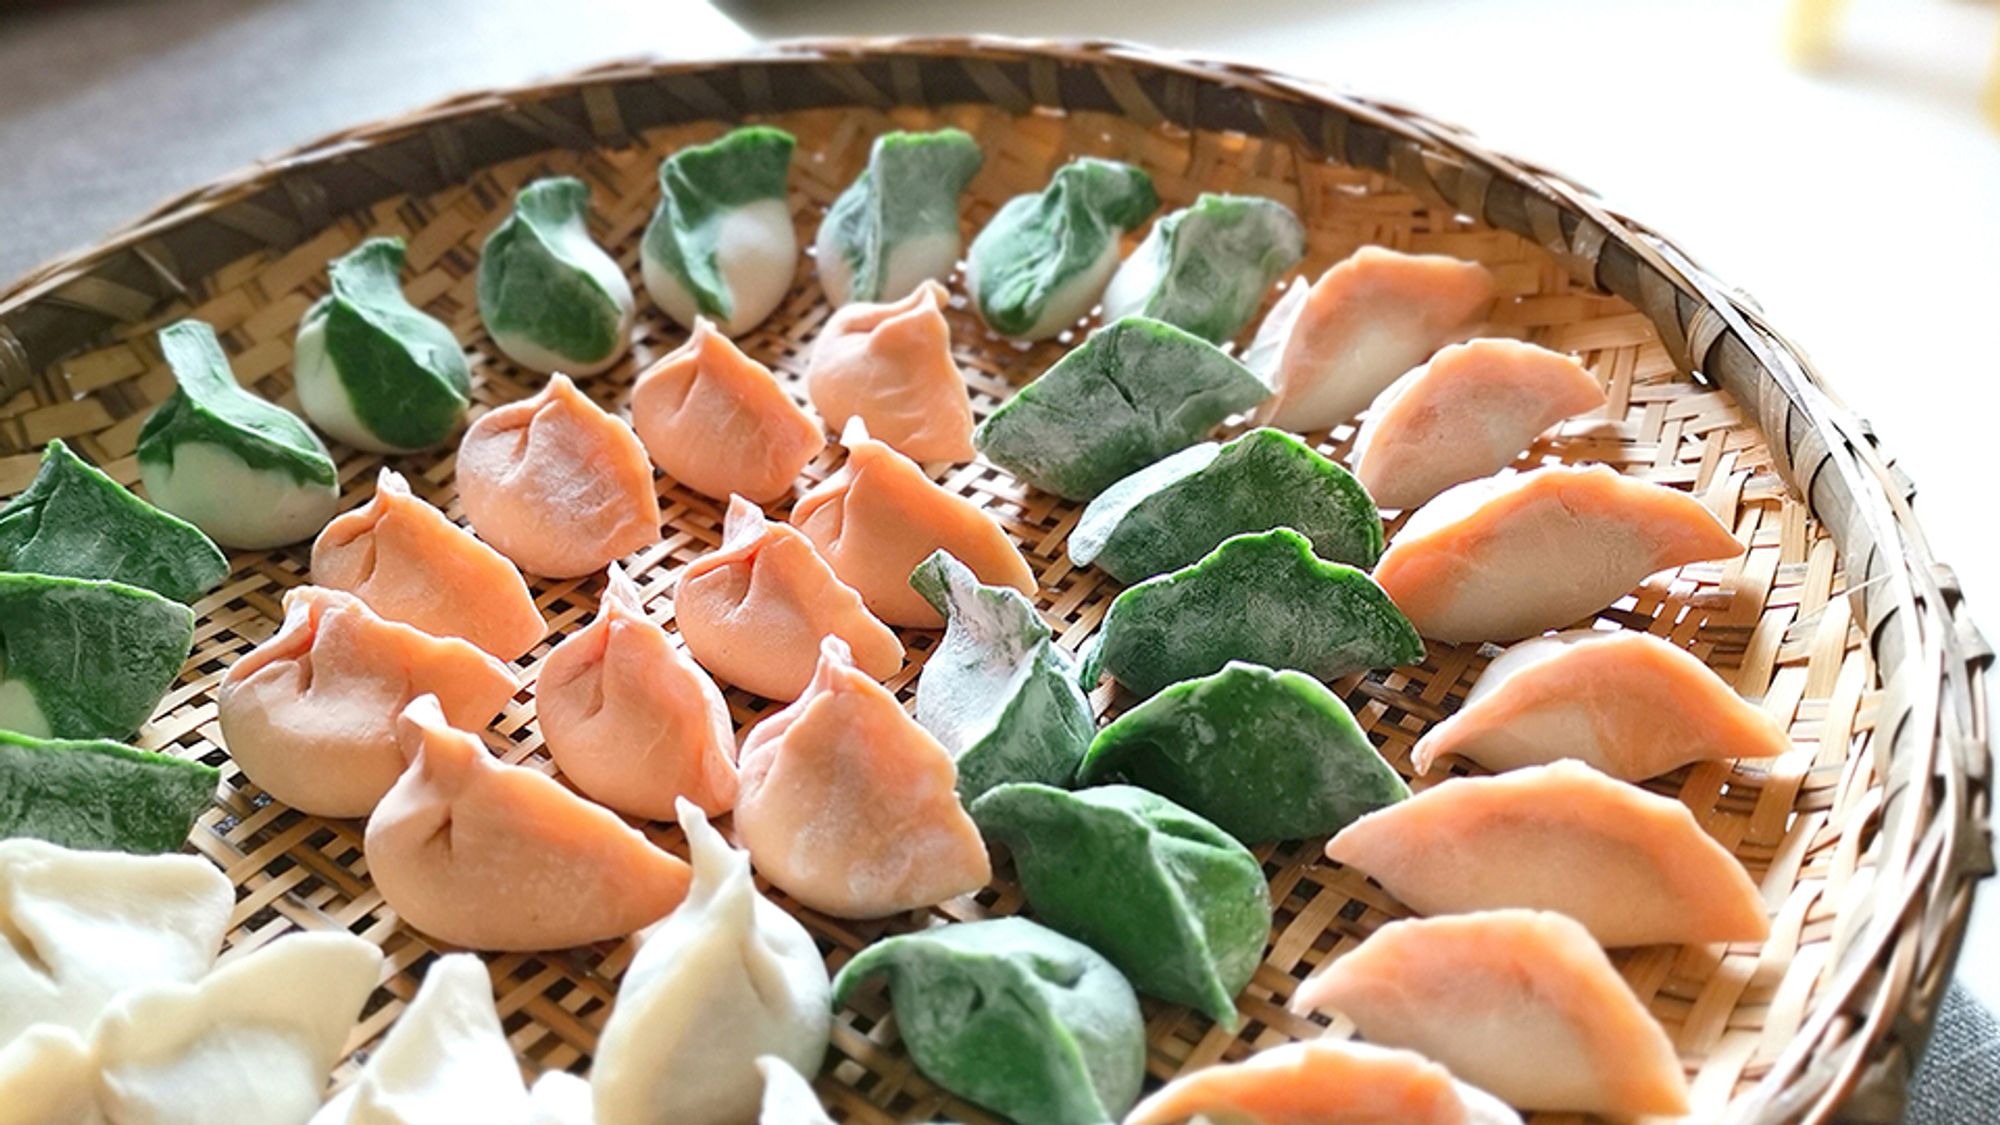 The jiaozi, or Chinese dumpling, symbolises reunion and good fortune